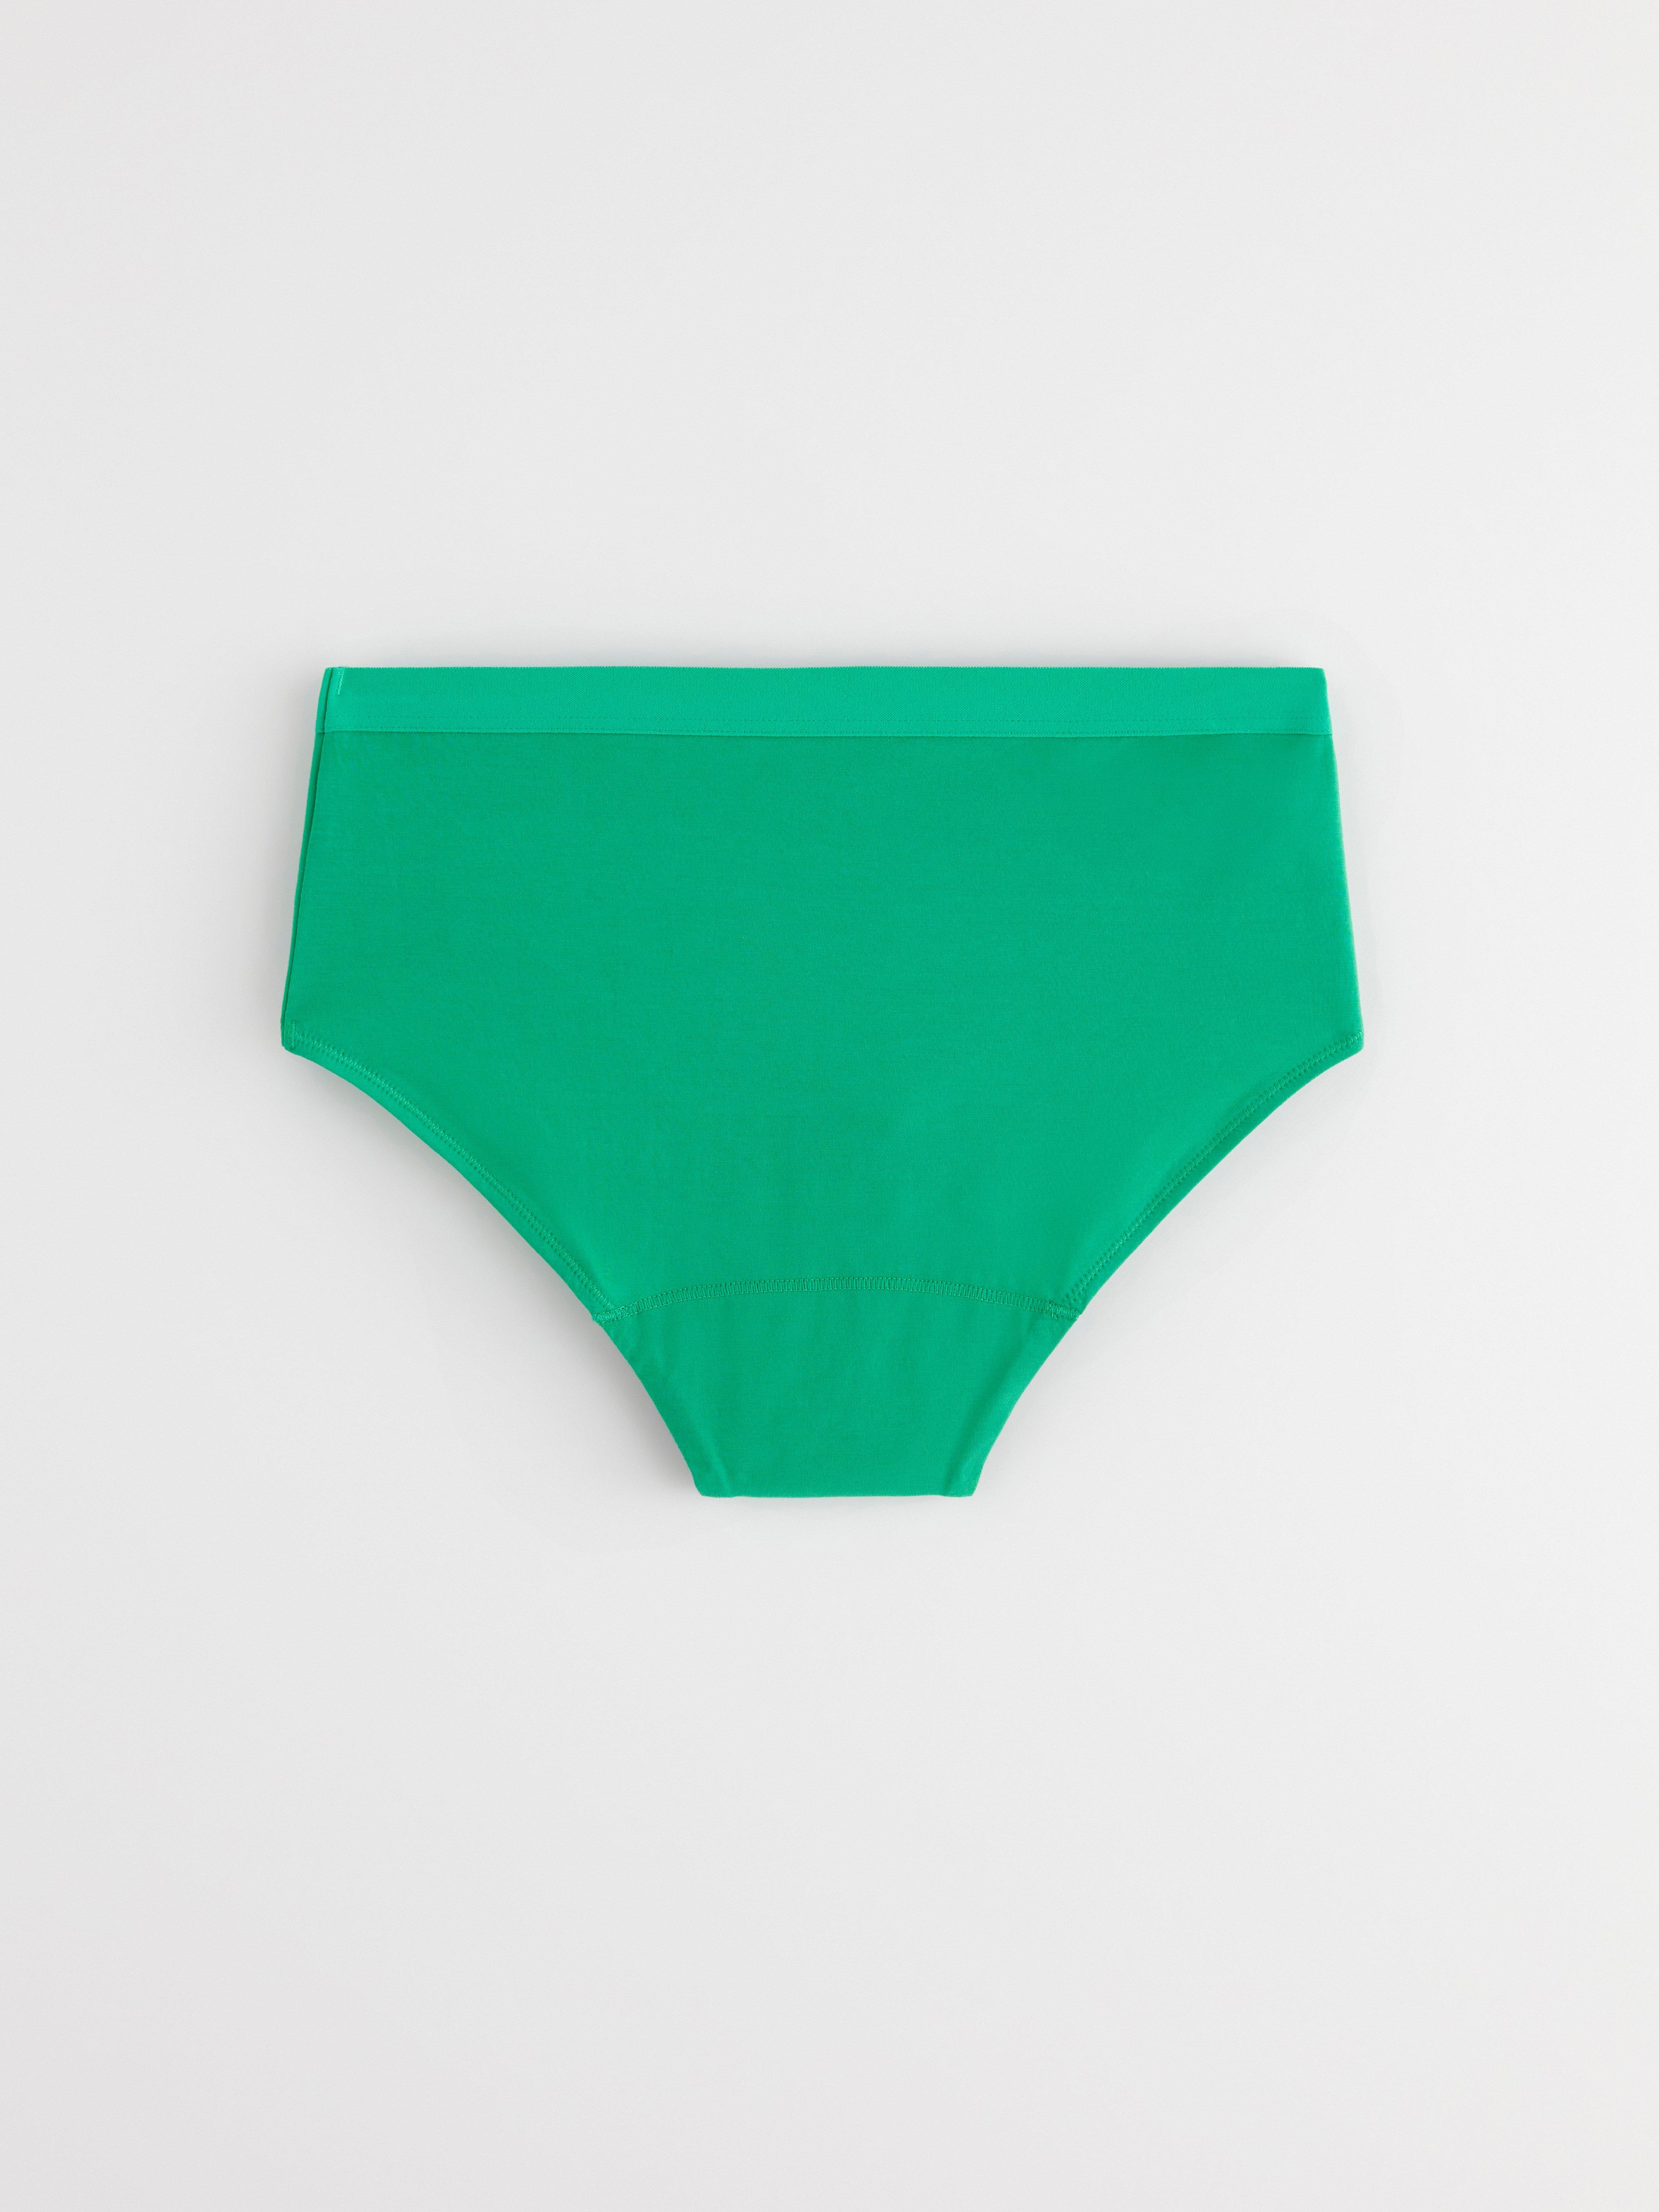 Period Panty with extended gusset - Teens Boxer Super - Female